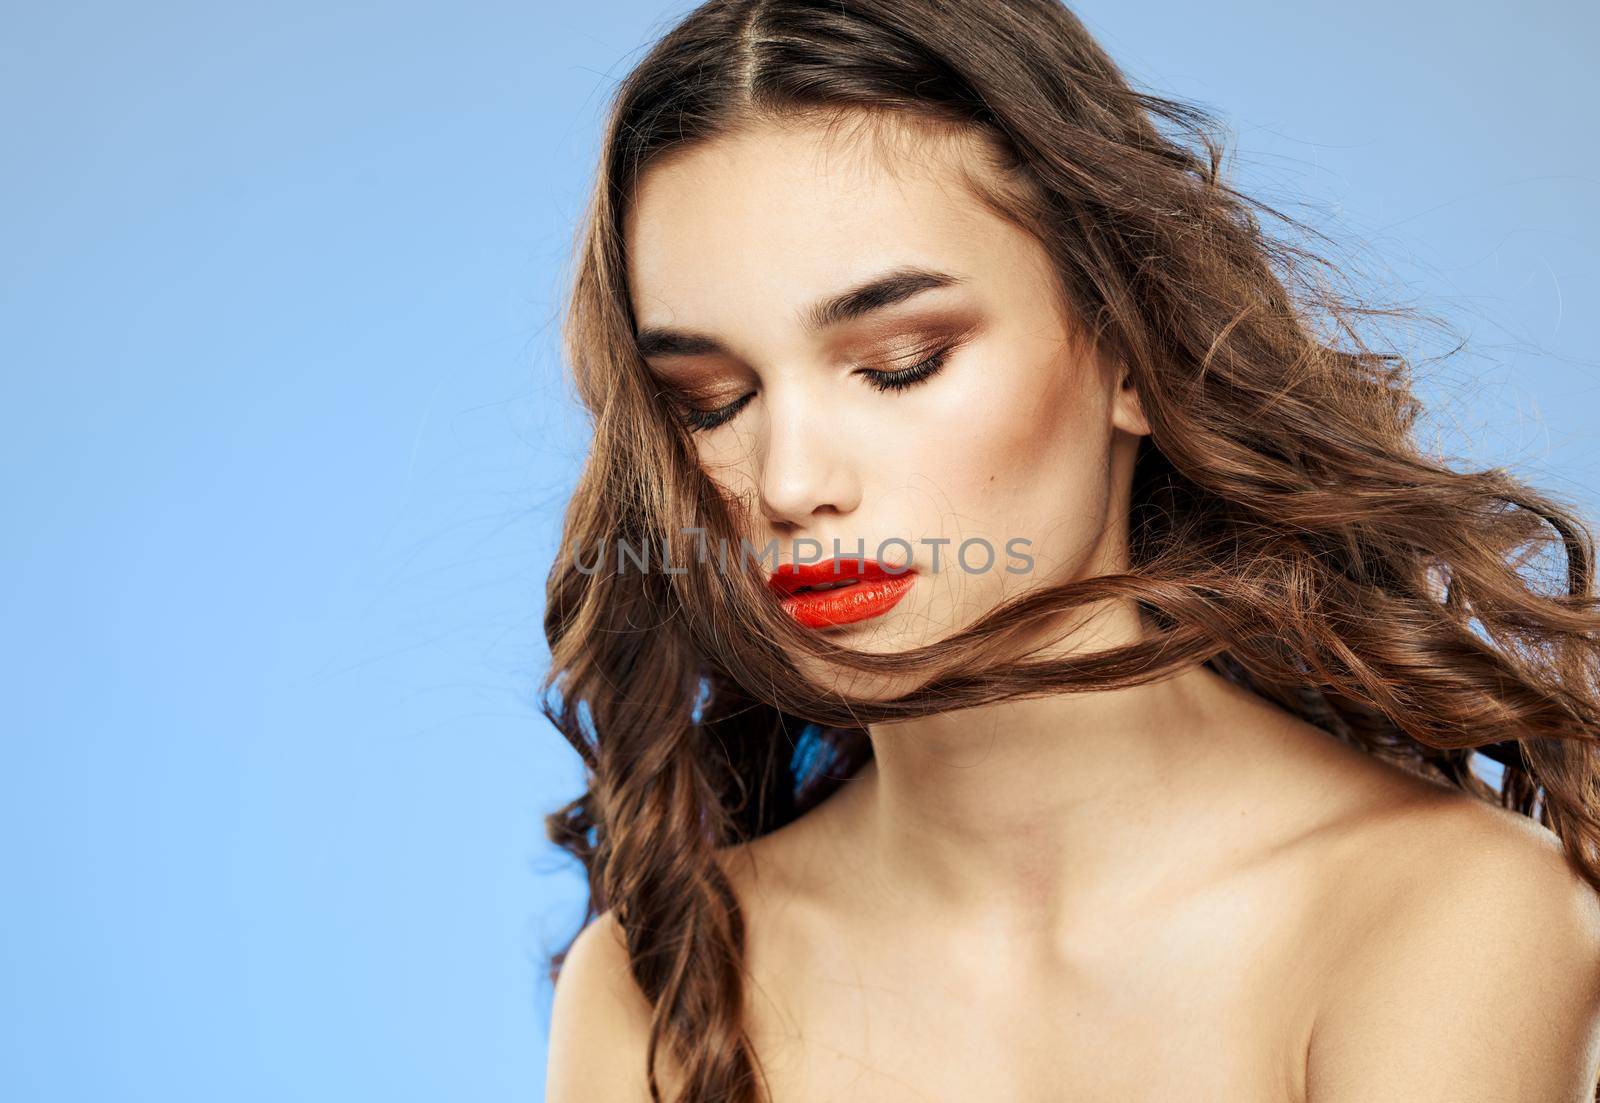 Woman on a dim background with long hair and red lips model makeup by SHOTPRIME